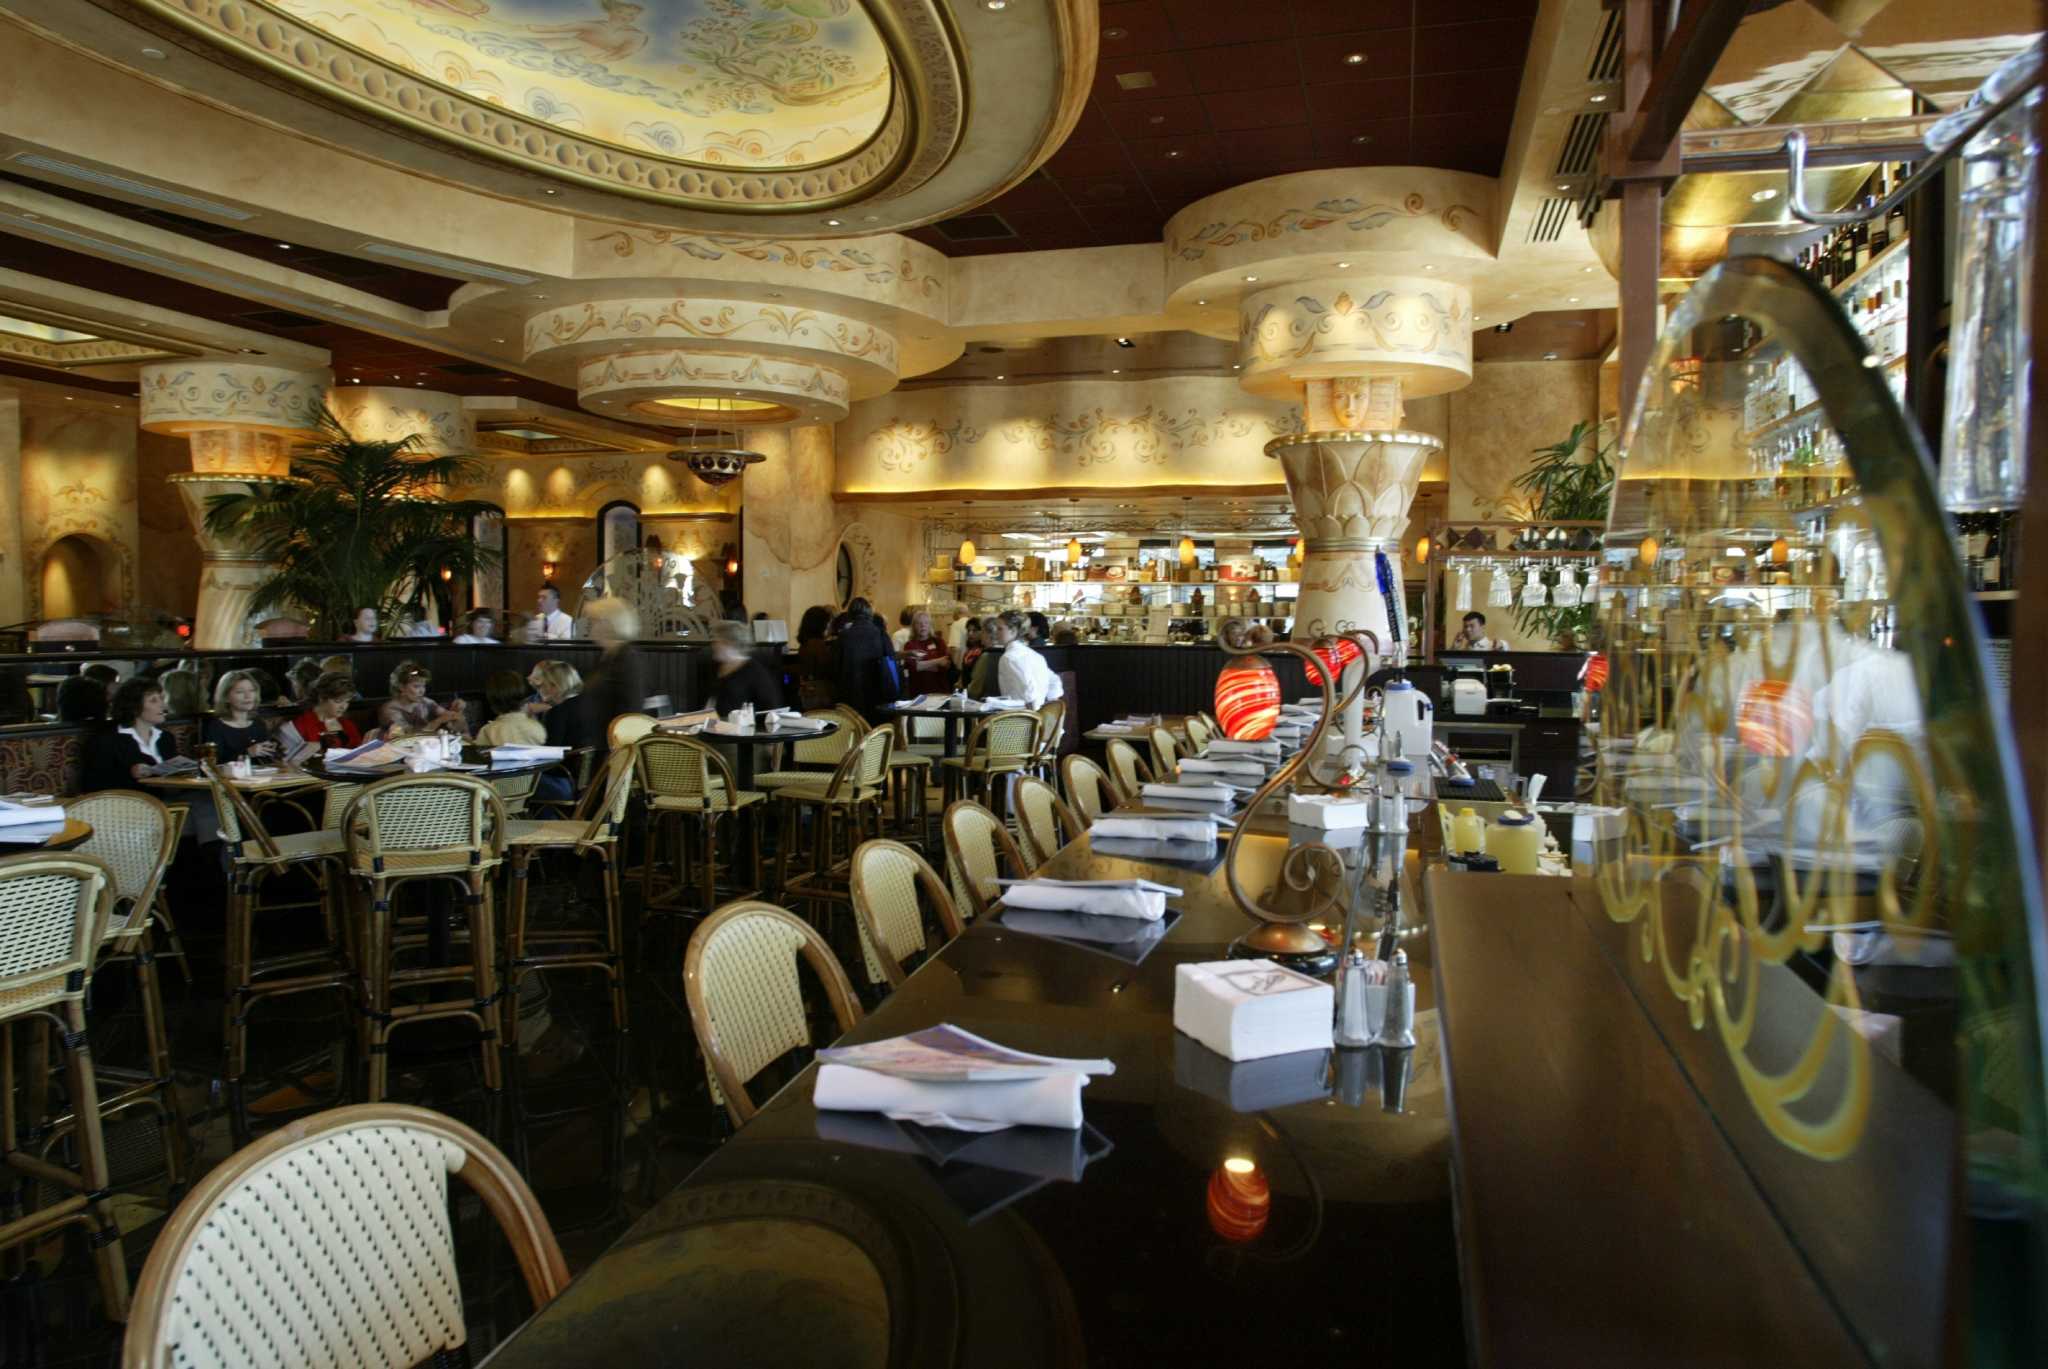 If you hate the decor of the Cheesecake Factory, San Francisco is ... - SFGate